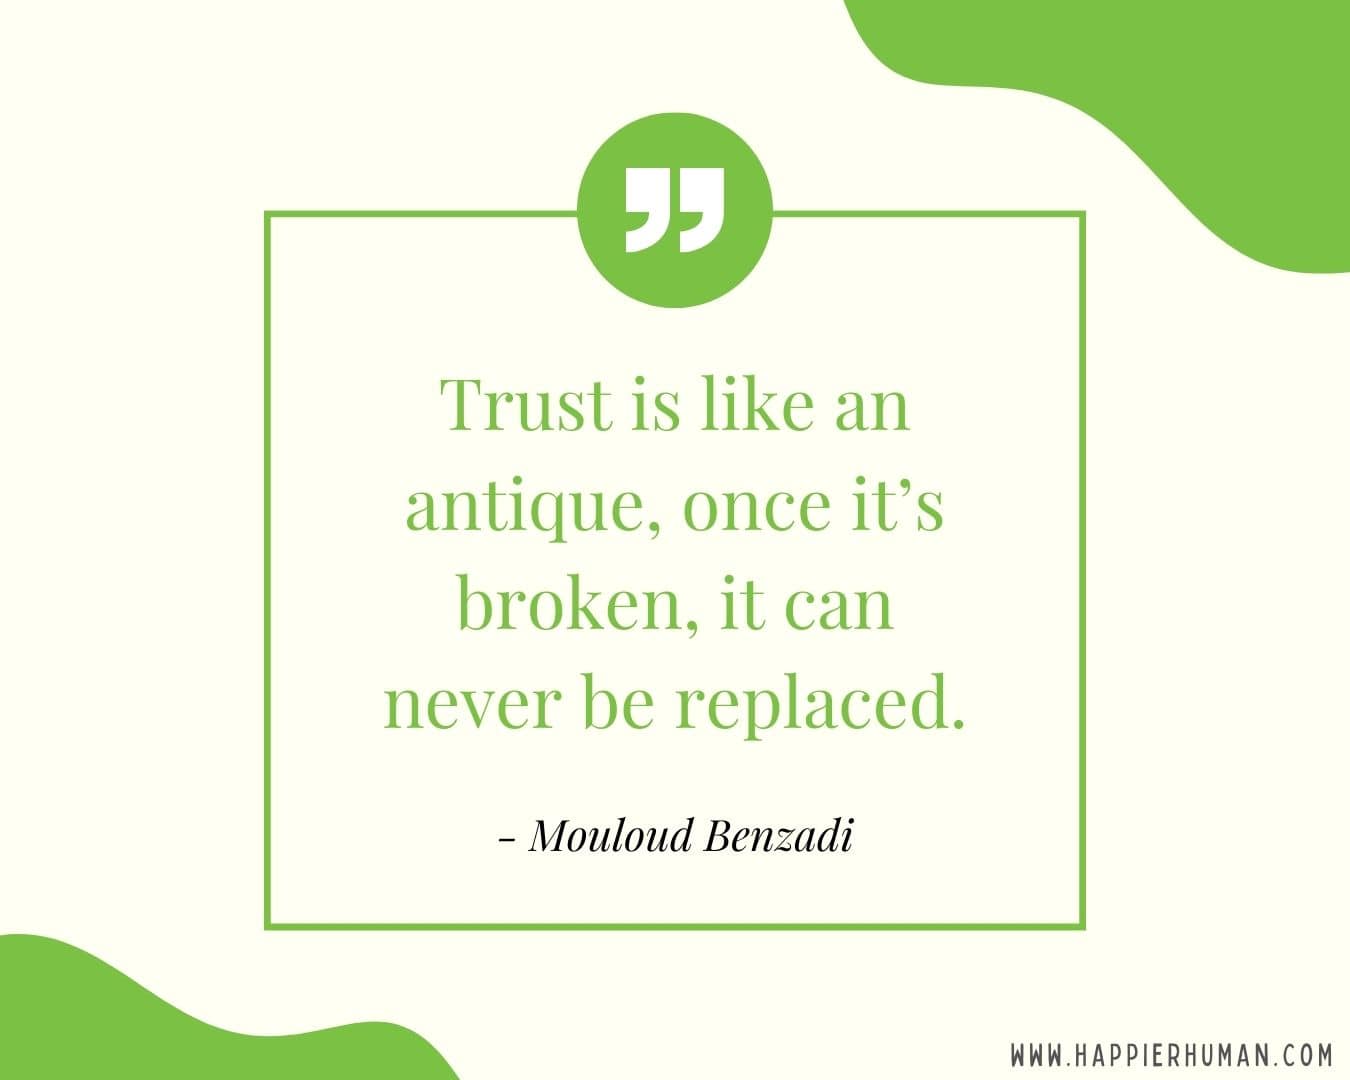 Broken Trust Quotes - “Trust is like an antique, once it’s broken, it can never be replaced.” - Mouloud Benzadi